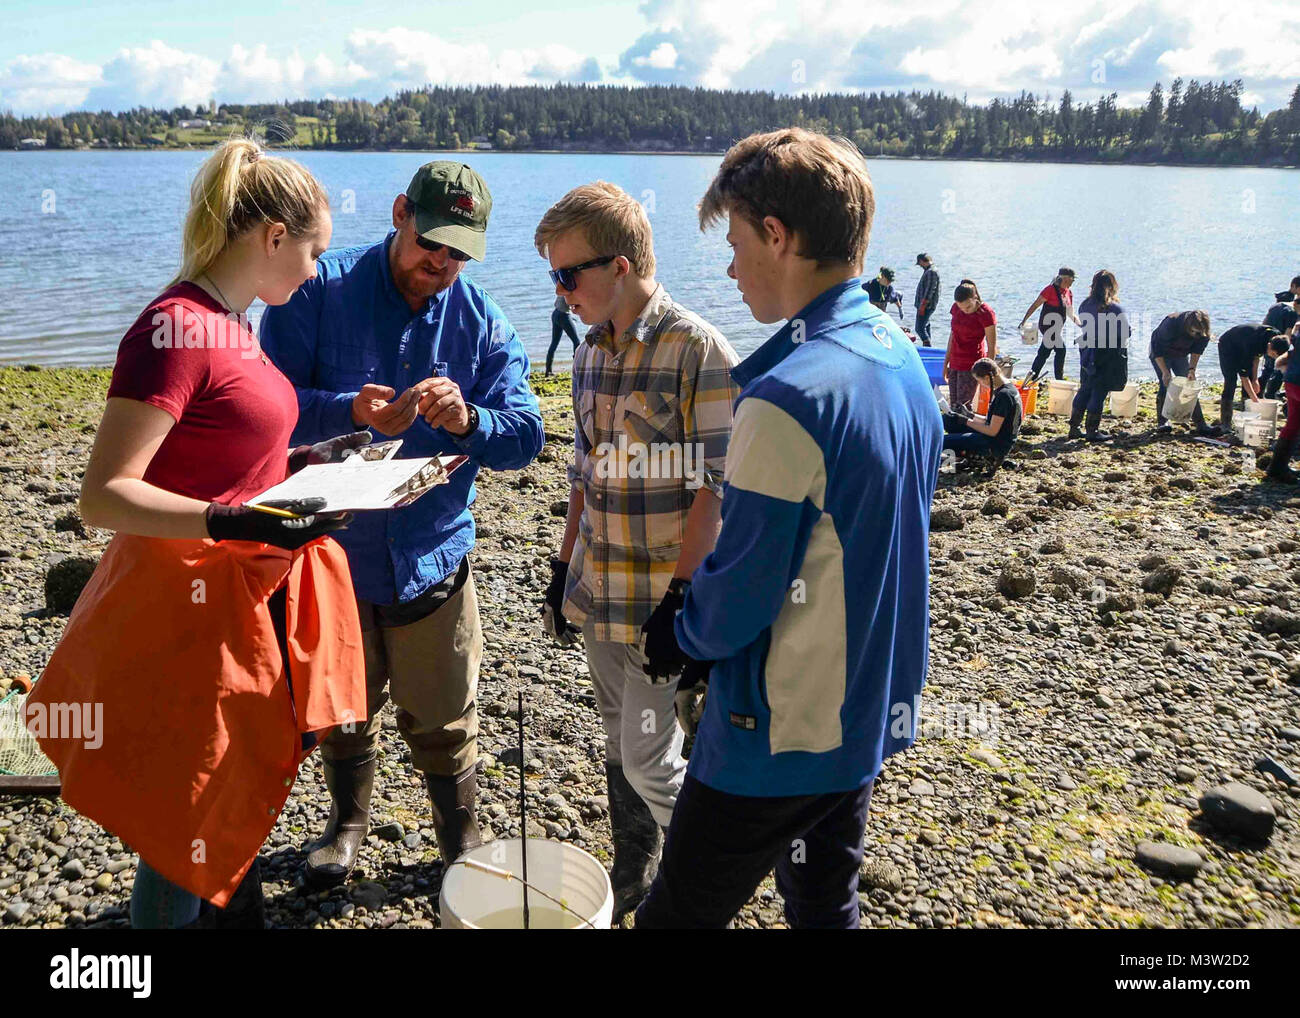 170428-N-VH385-112 INDIAN ISLAND, Wash., (April 28, 2017) – Lyle Britt, a reasearcher with the Alaska Fishery and Science Center, shows a crab to some students from Blue Heron Middle School during a community outreach beach seining with the United States Geological Survey (USGS) at Naval Magazine Indian Island. This is the third year the USGS has teamed up with Blue Heron Middle School and Naval Magazine Indian Island to conduct beach seinings in preparation for the Kilsut Spit waterflow to be opened between Marrowstone and Indian Island. (U.S. Navy photo by Mass Communication Specialist 3rd C Stock Photo